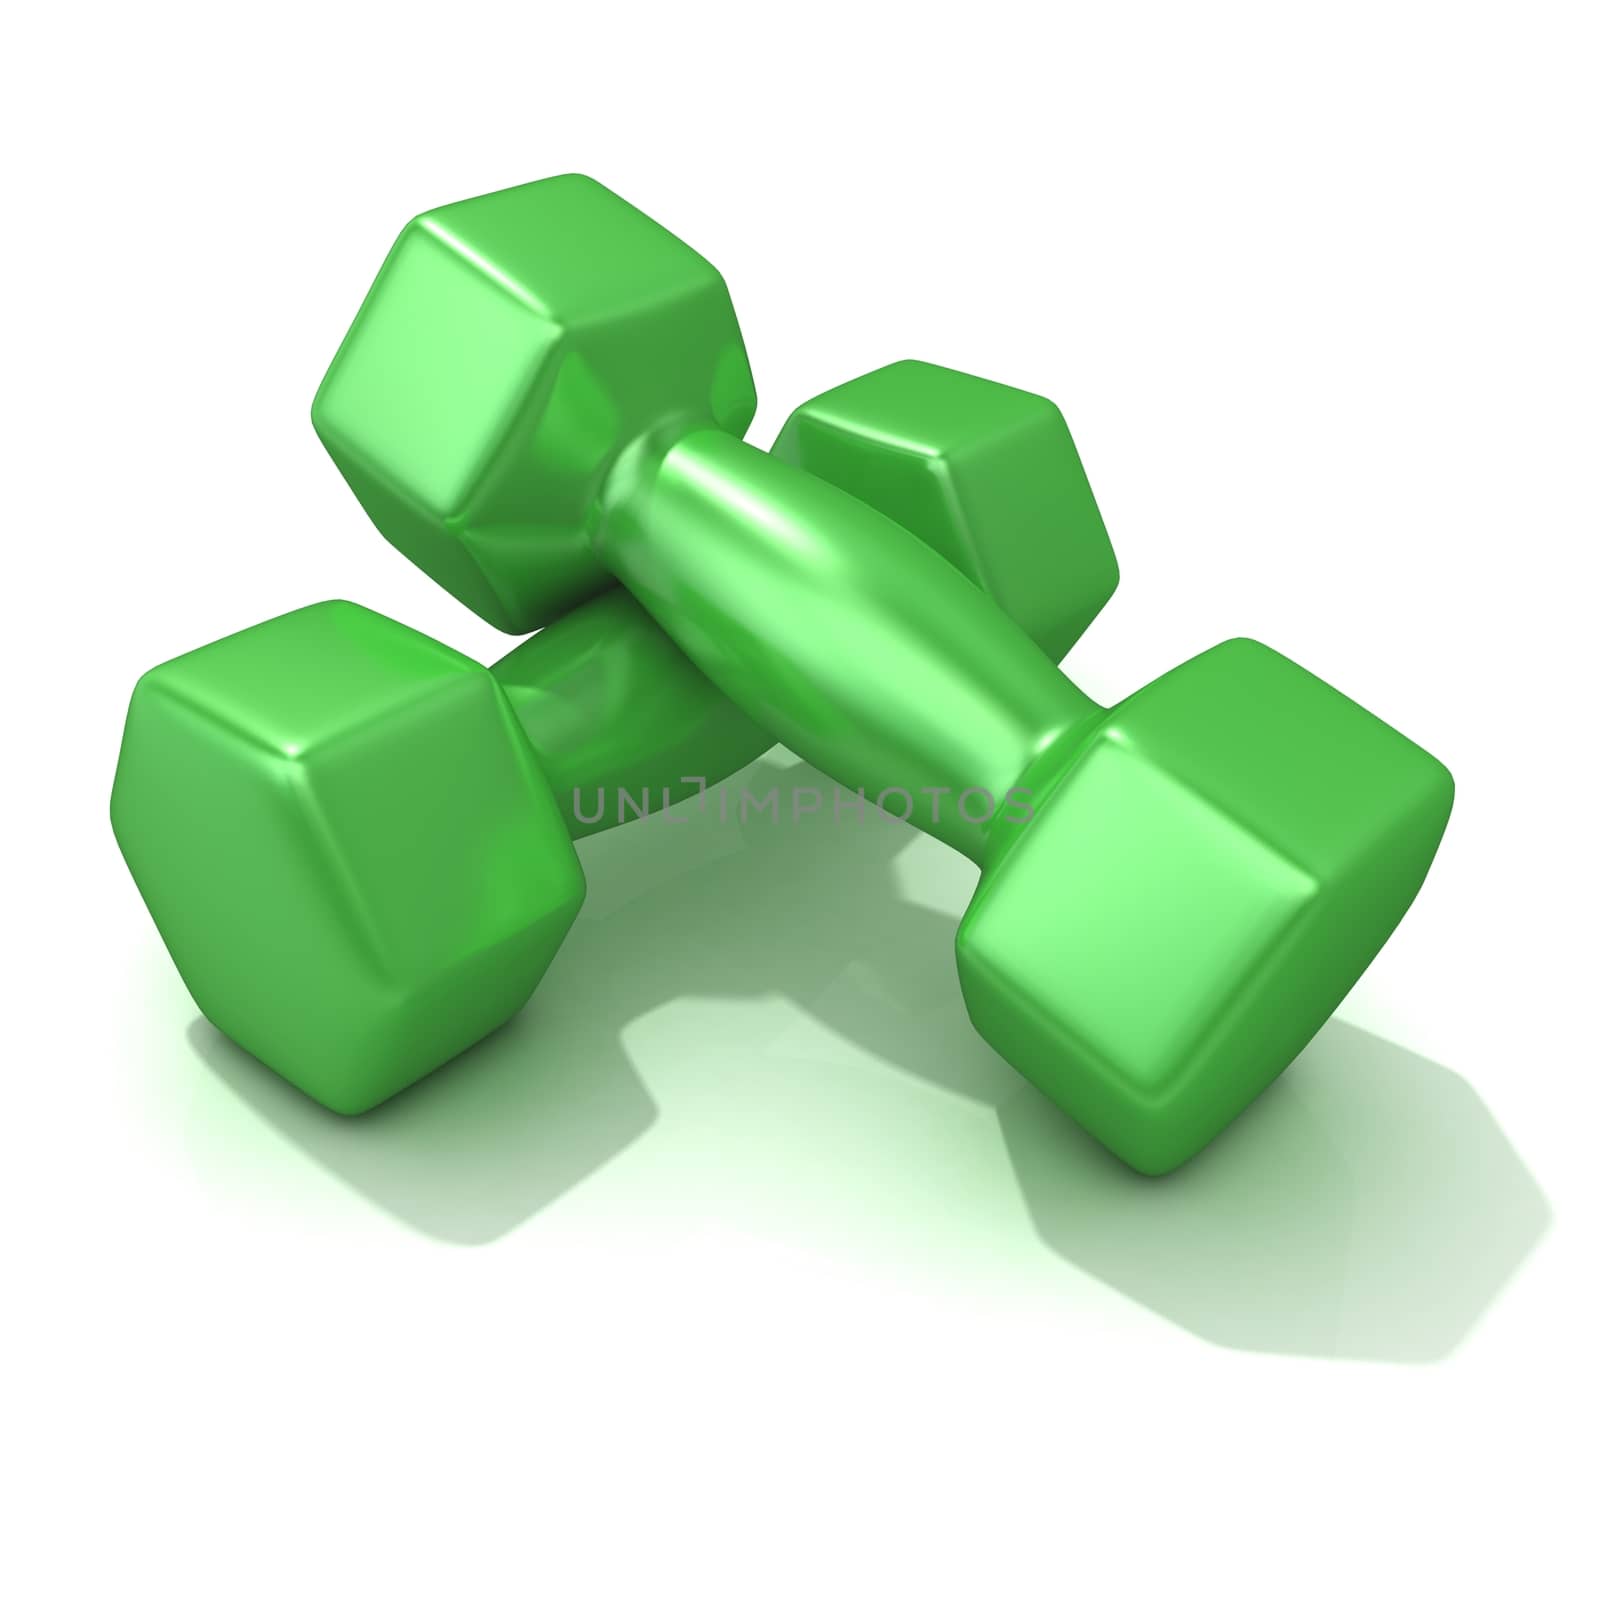 Green weights by djmilic